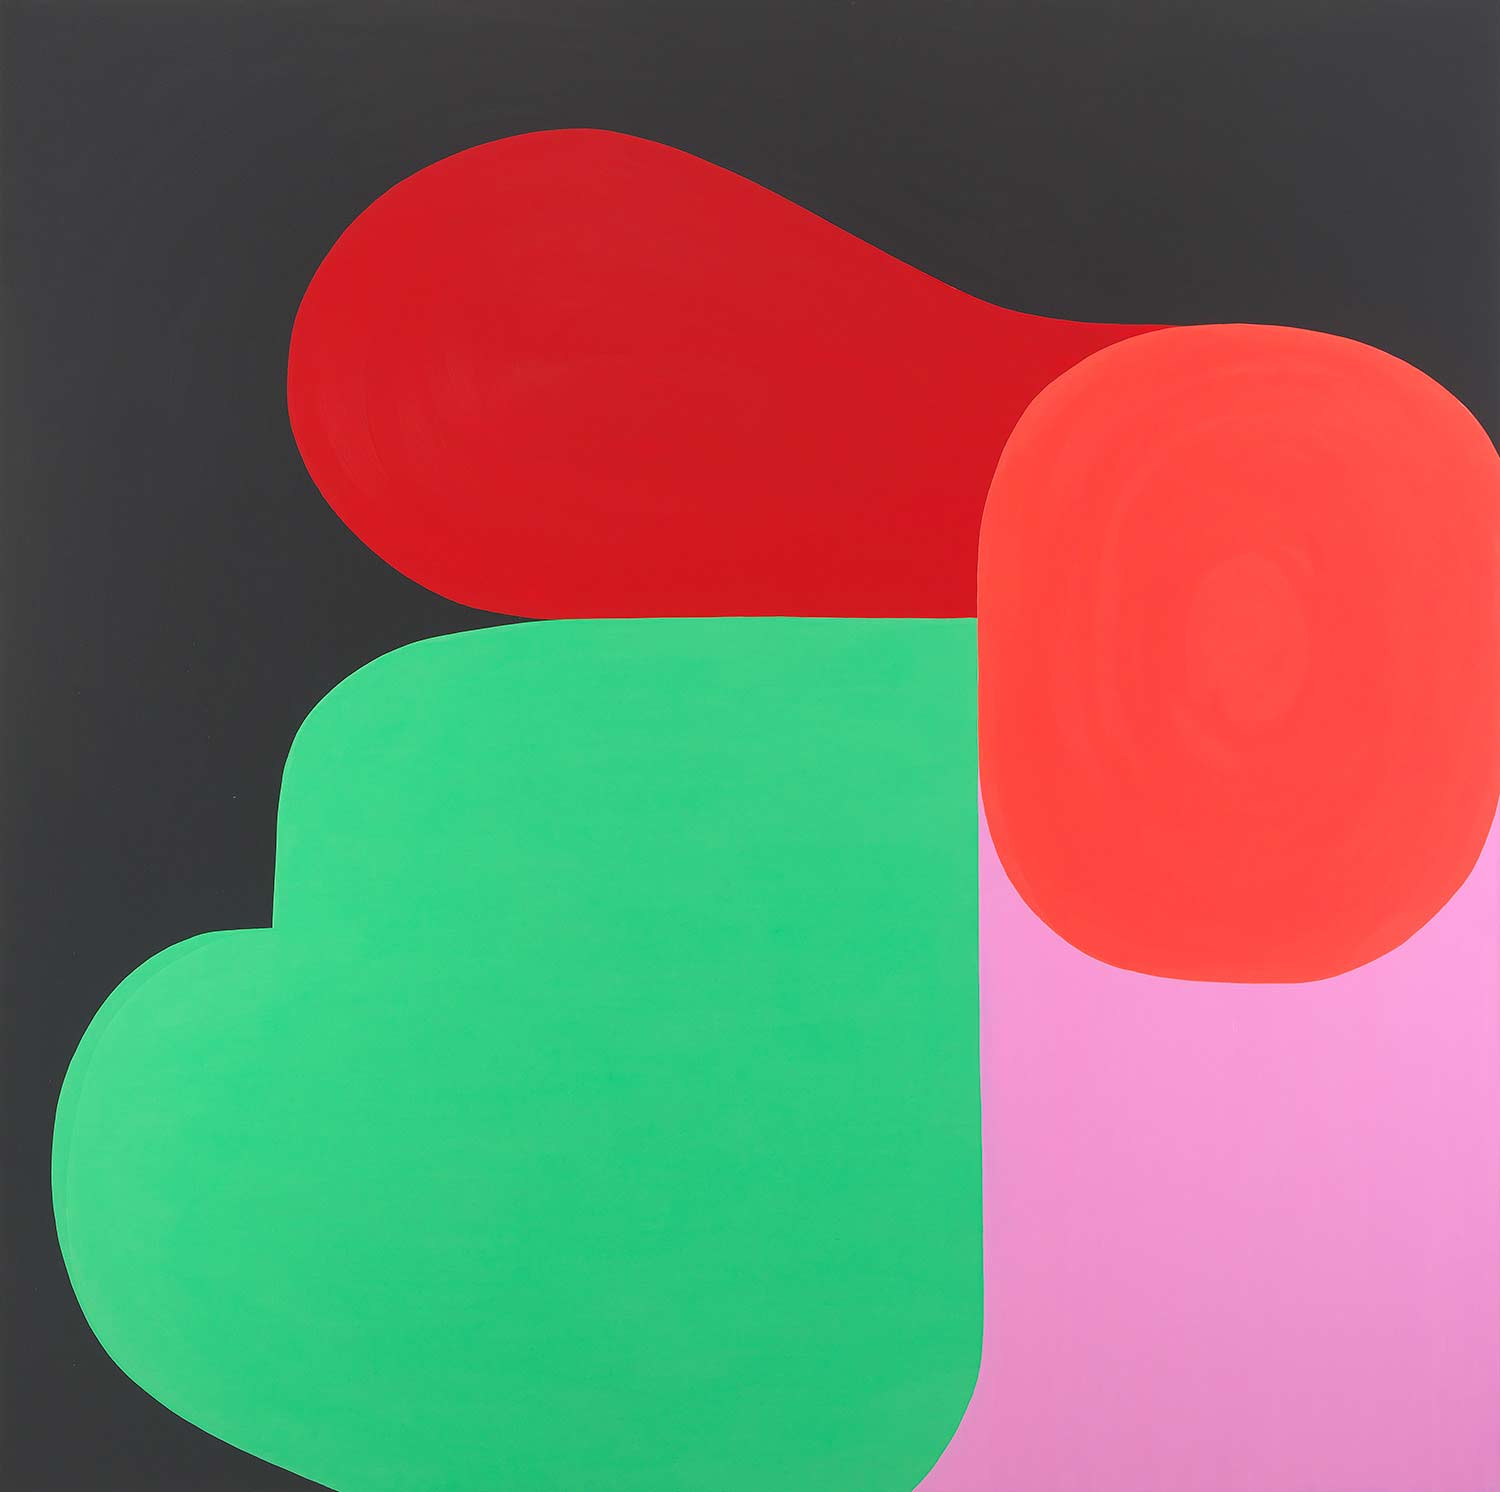 The Living Room by Stephen Ormandy at Olsen Gallery